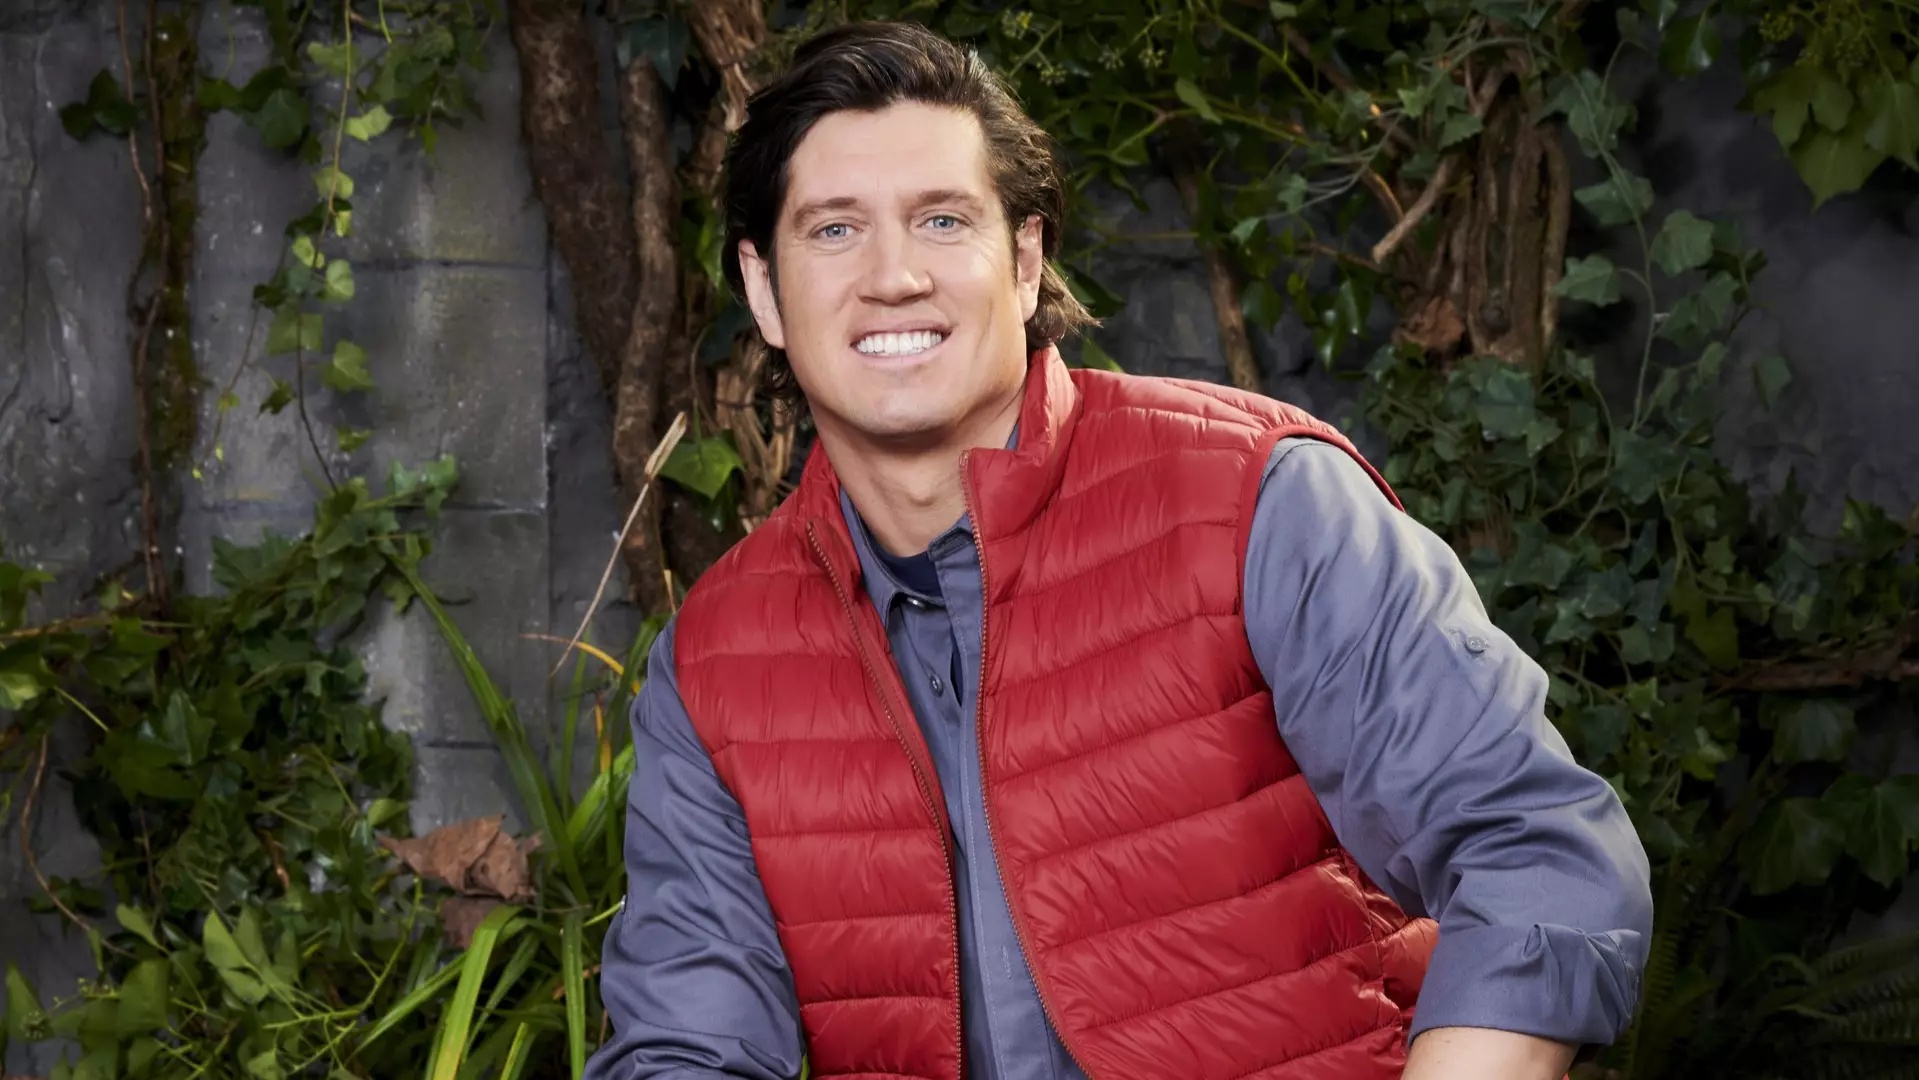 I'm A Celebrity's Vernon Kay Is Sending Cryptic Messages To Tess Daly And Kids On Air